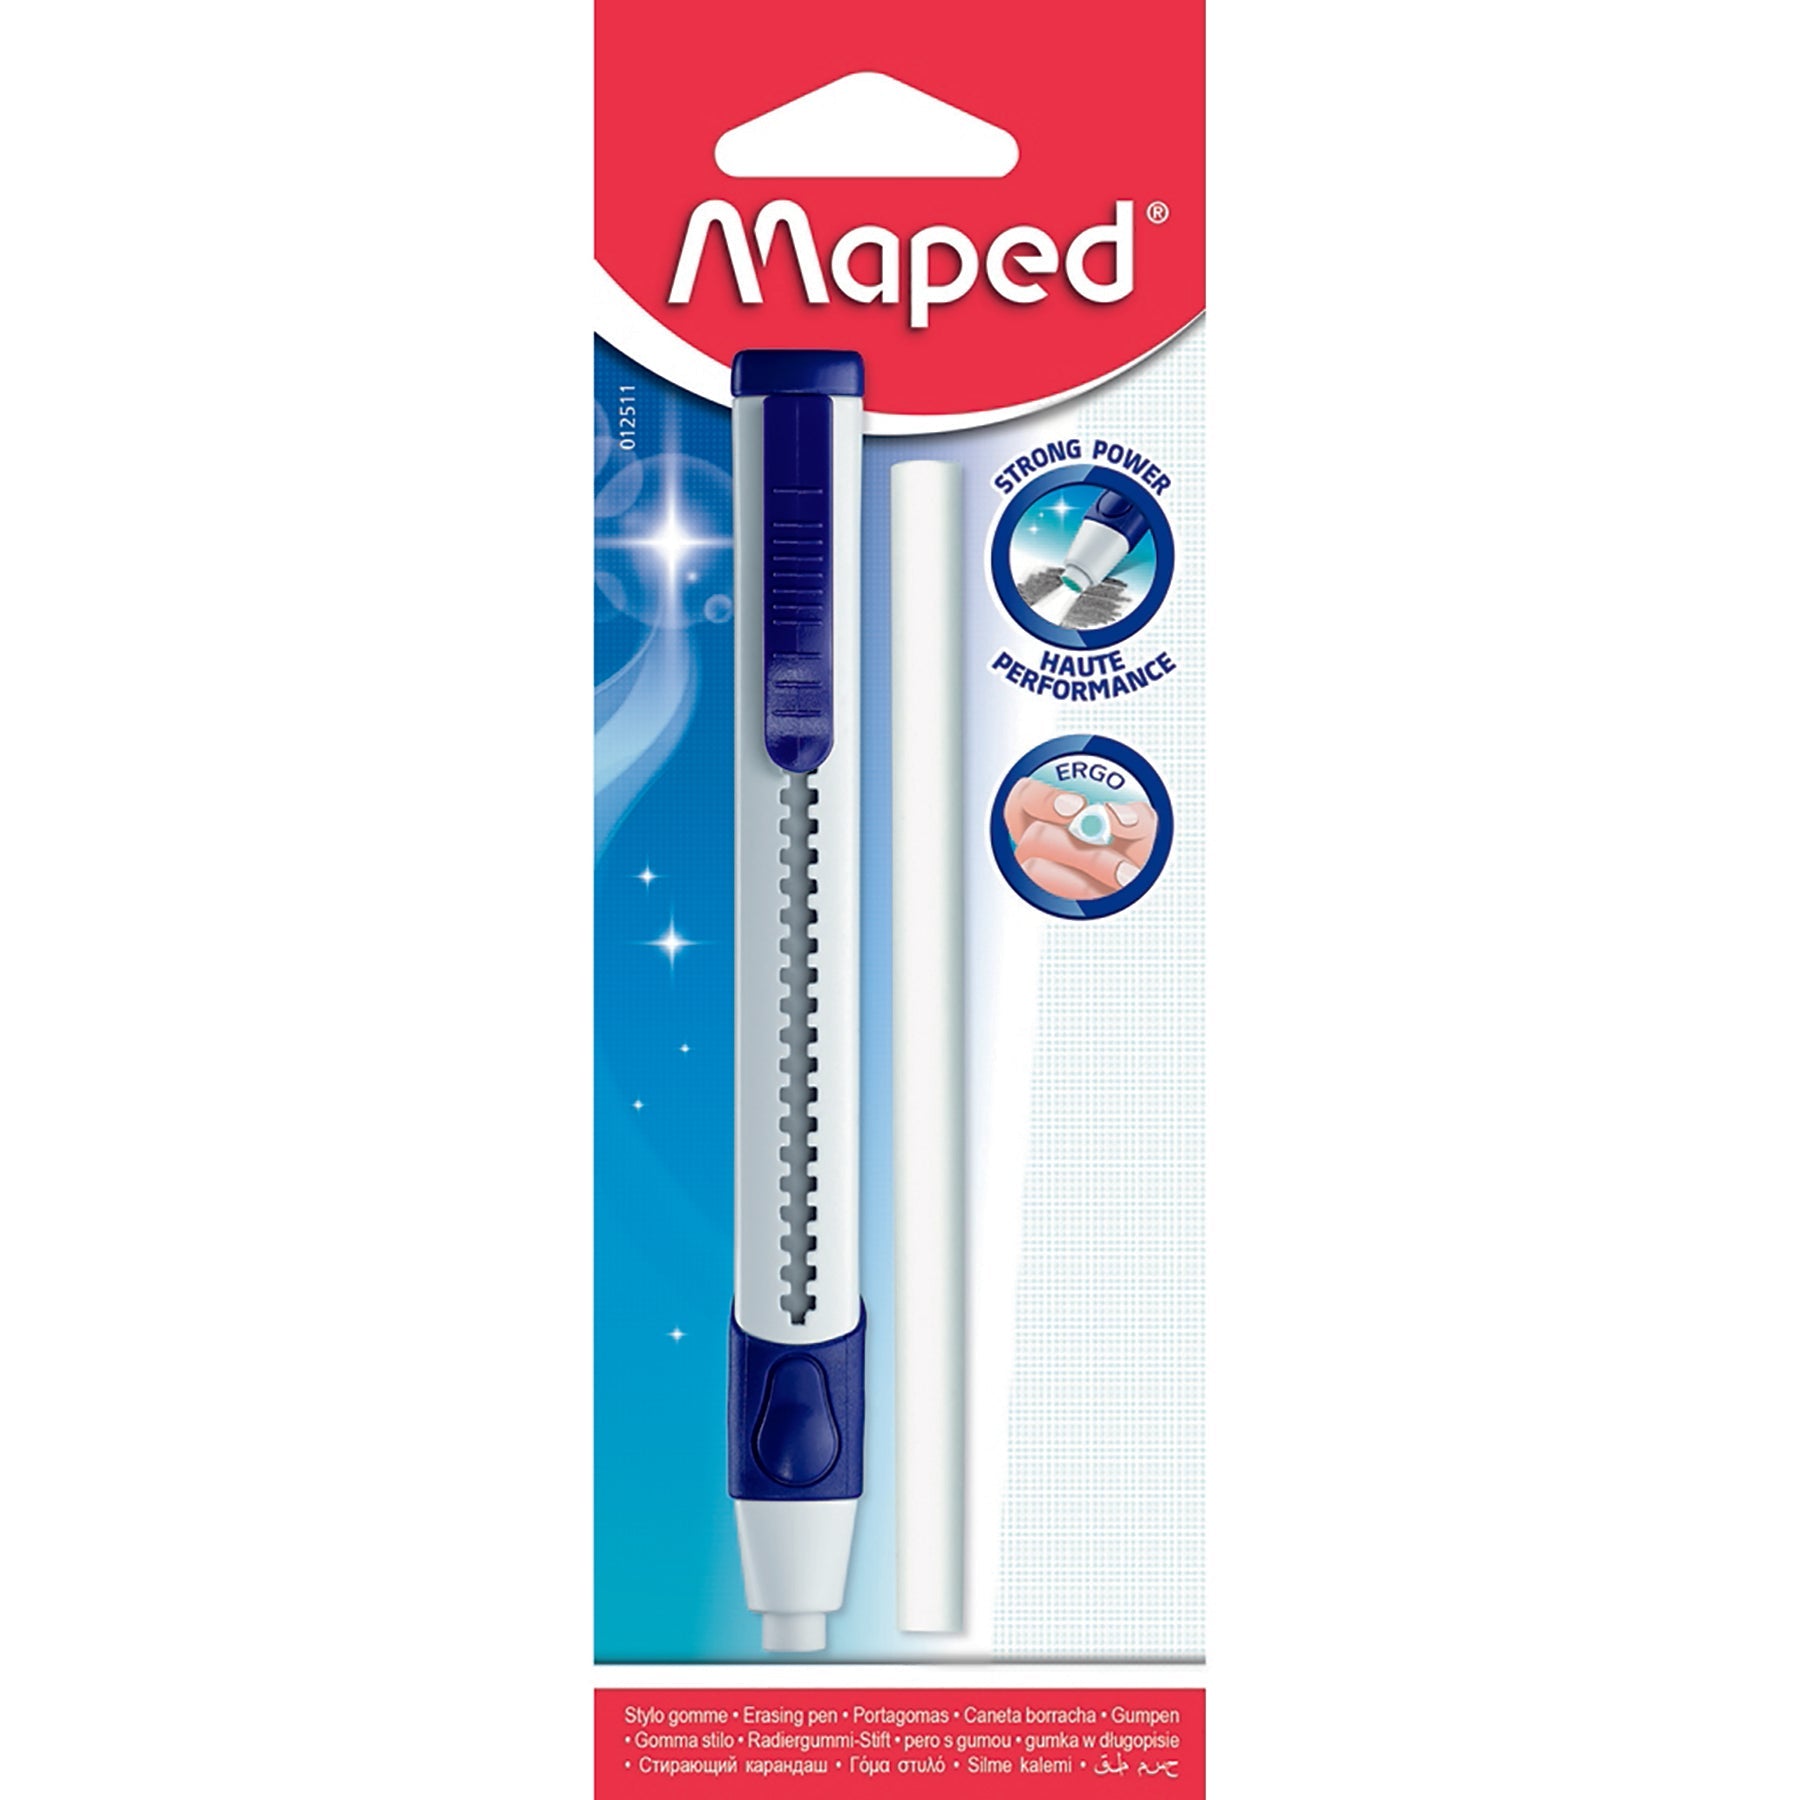 Maped Gom Pen Eraser and Refill 5.4in